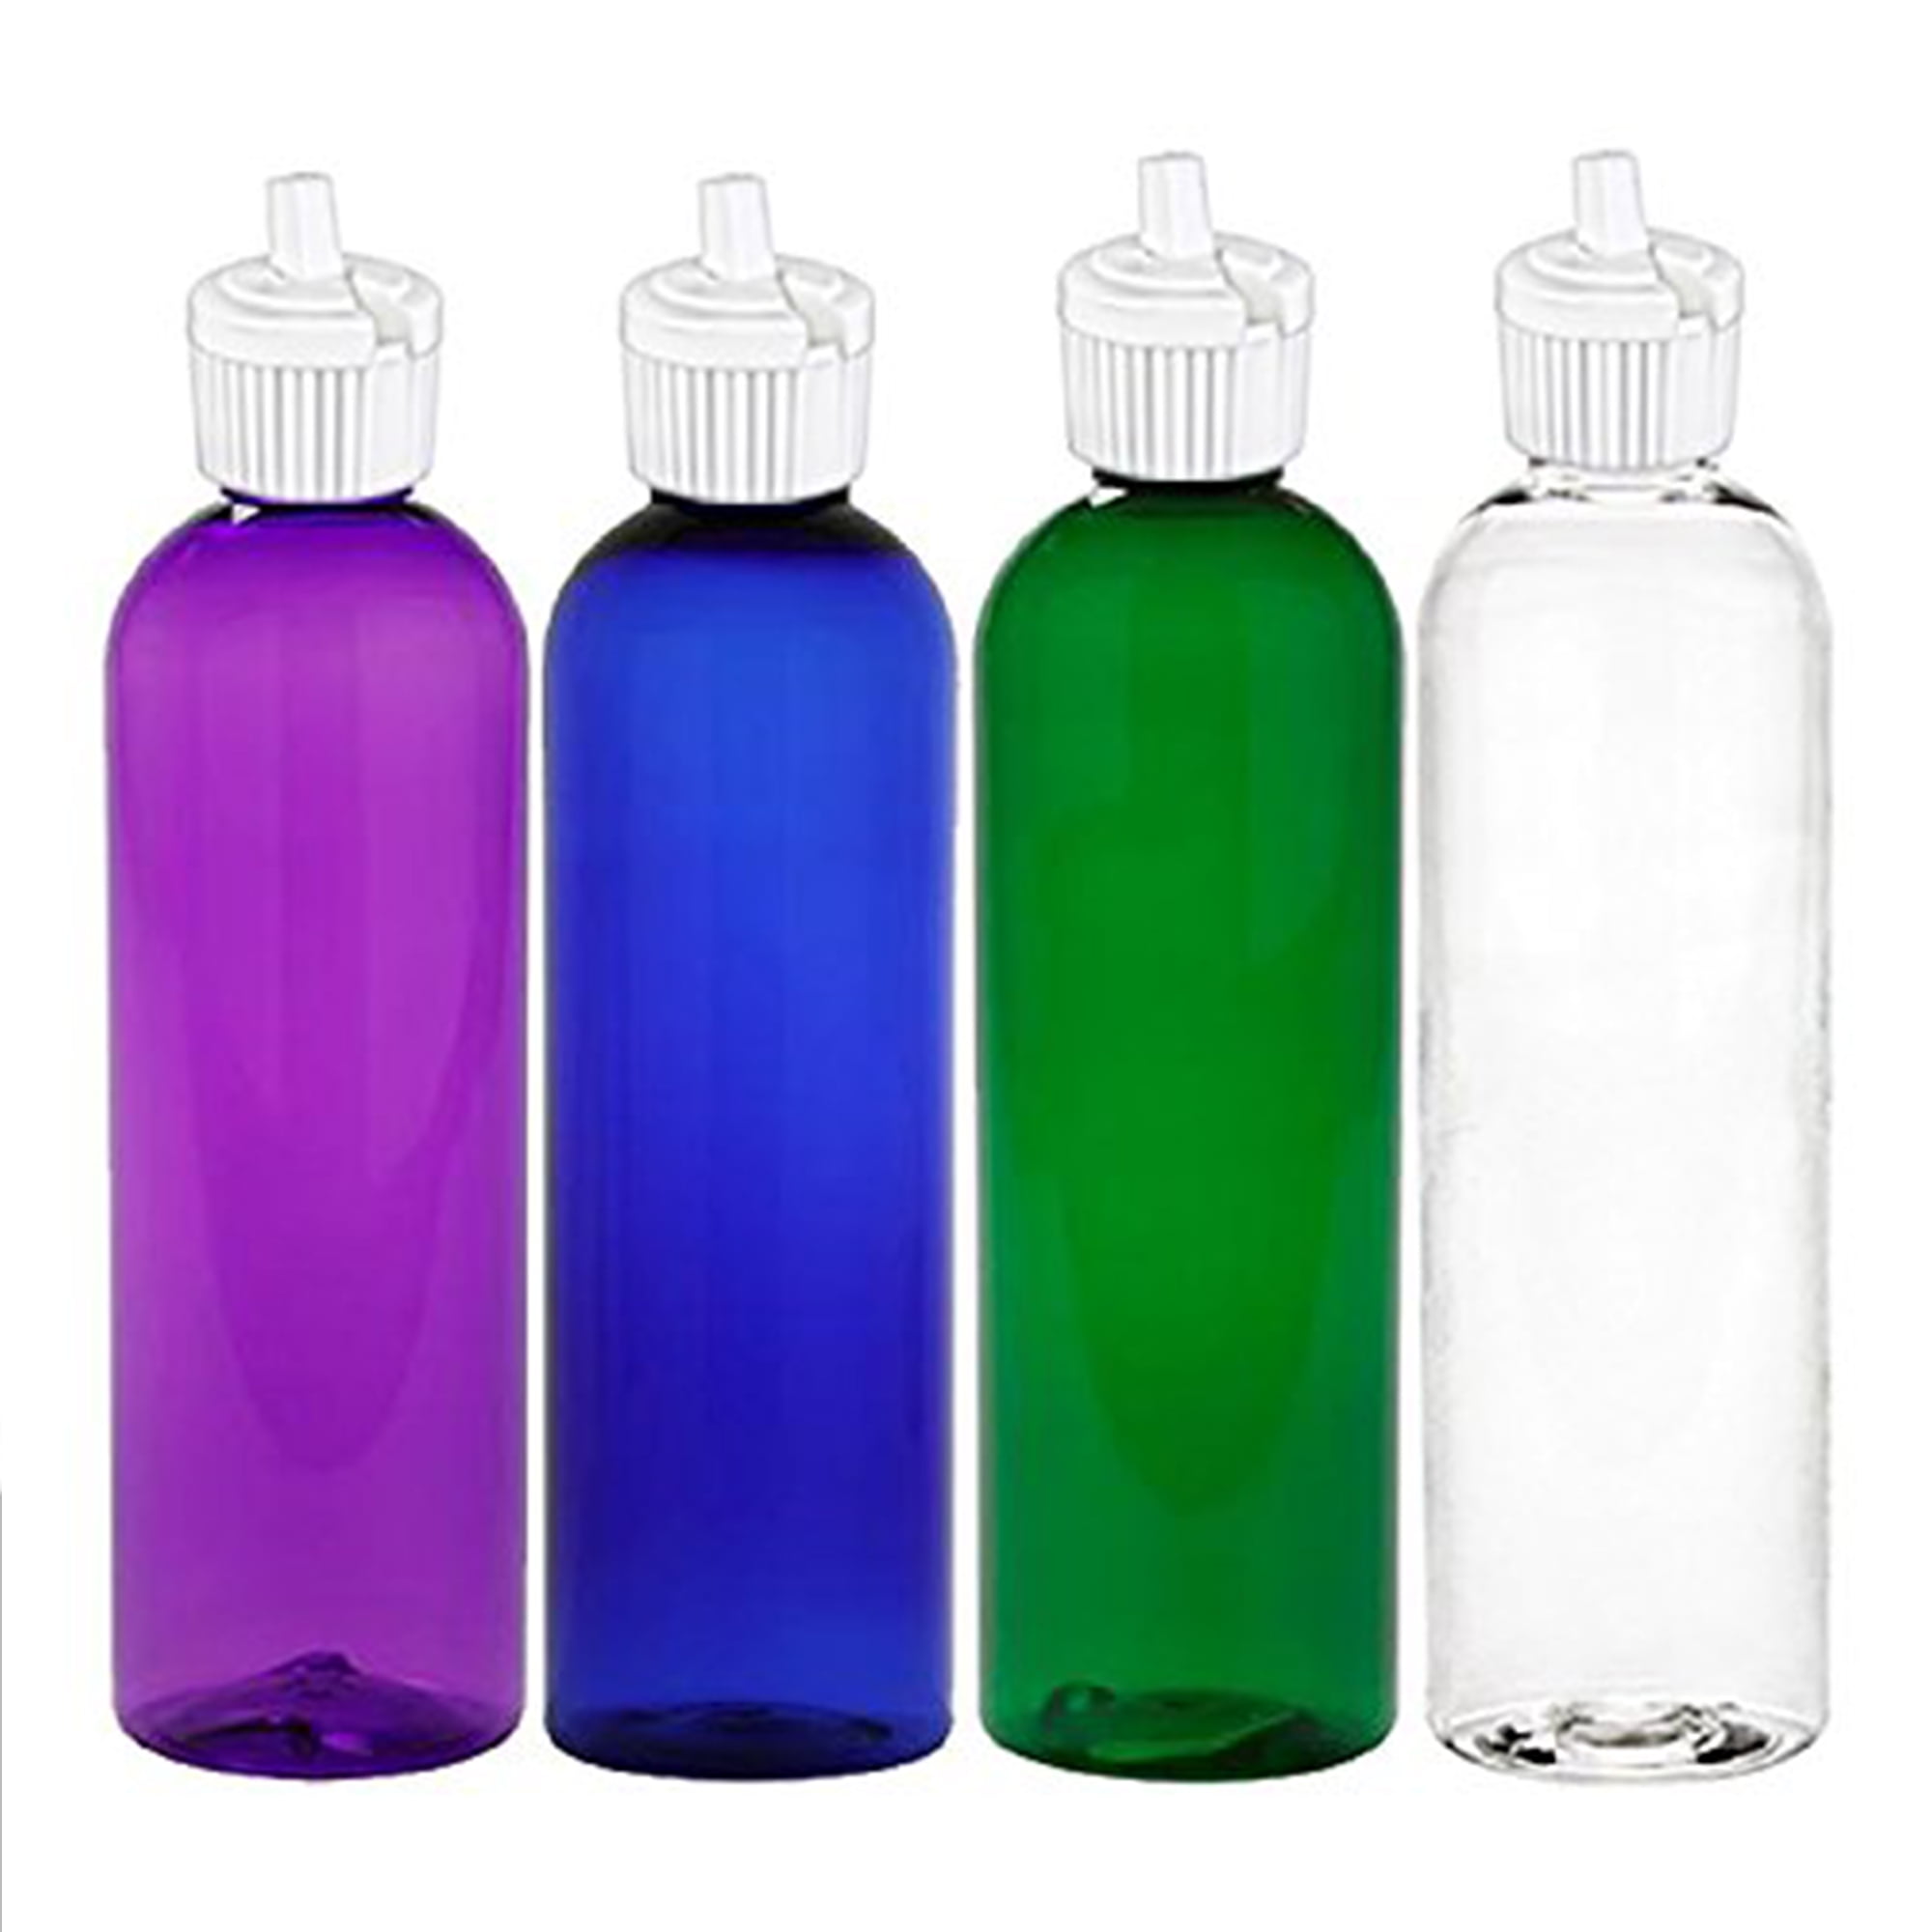 MoYo Natural Labs 16 oz Squirt Bottles, Squeezable Refillable Containe